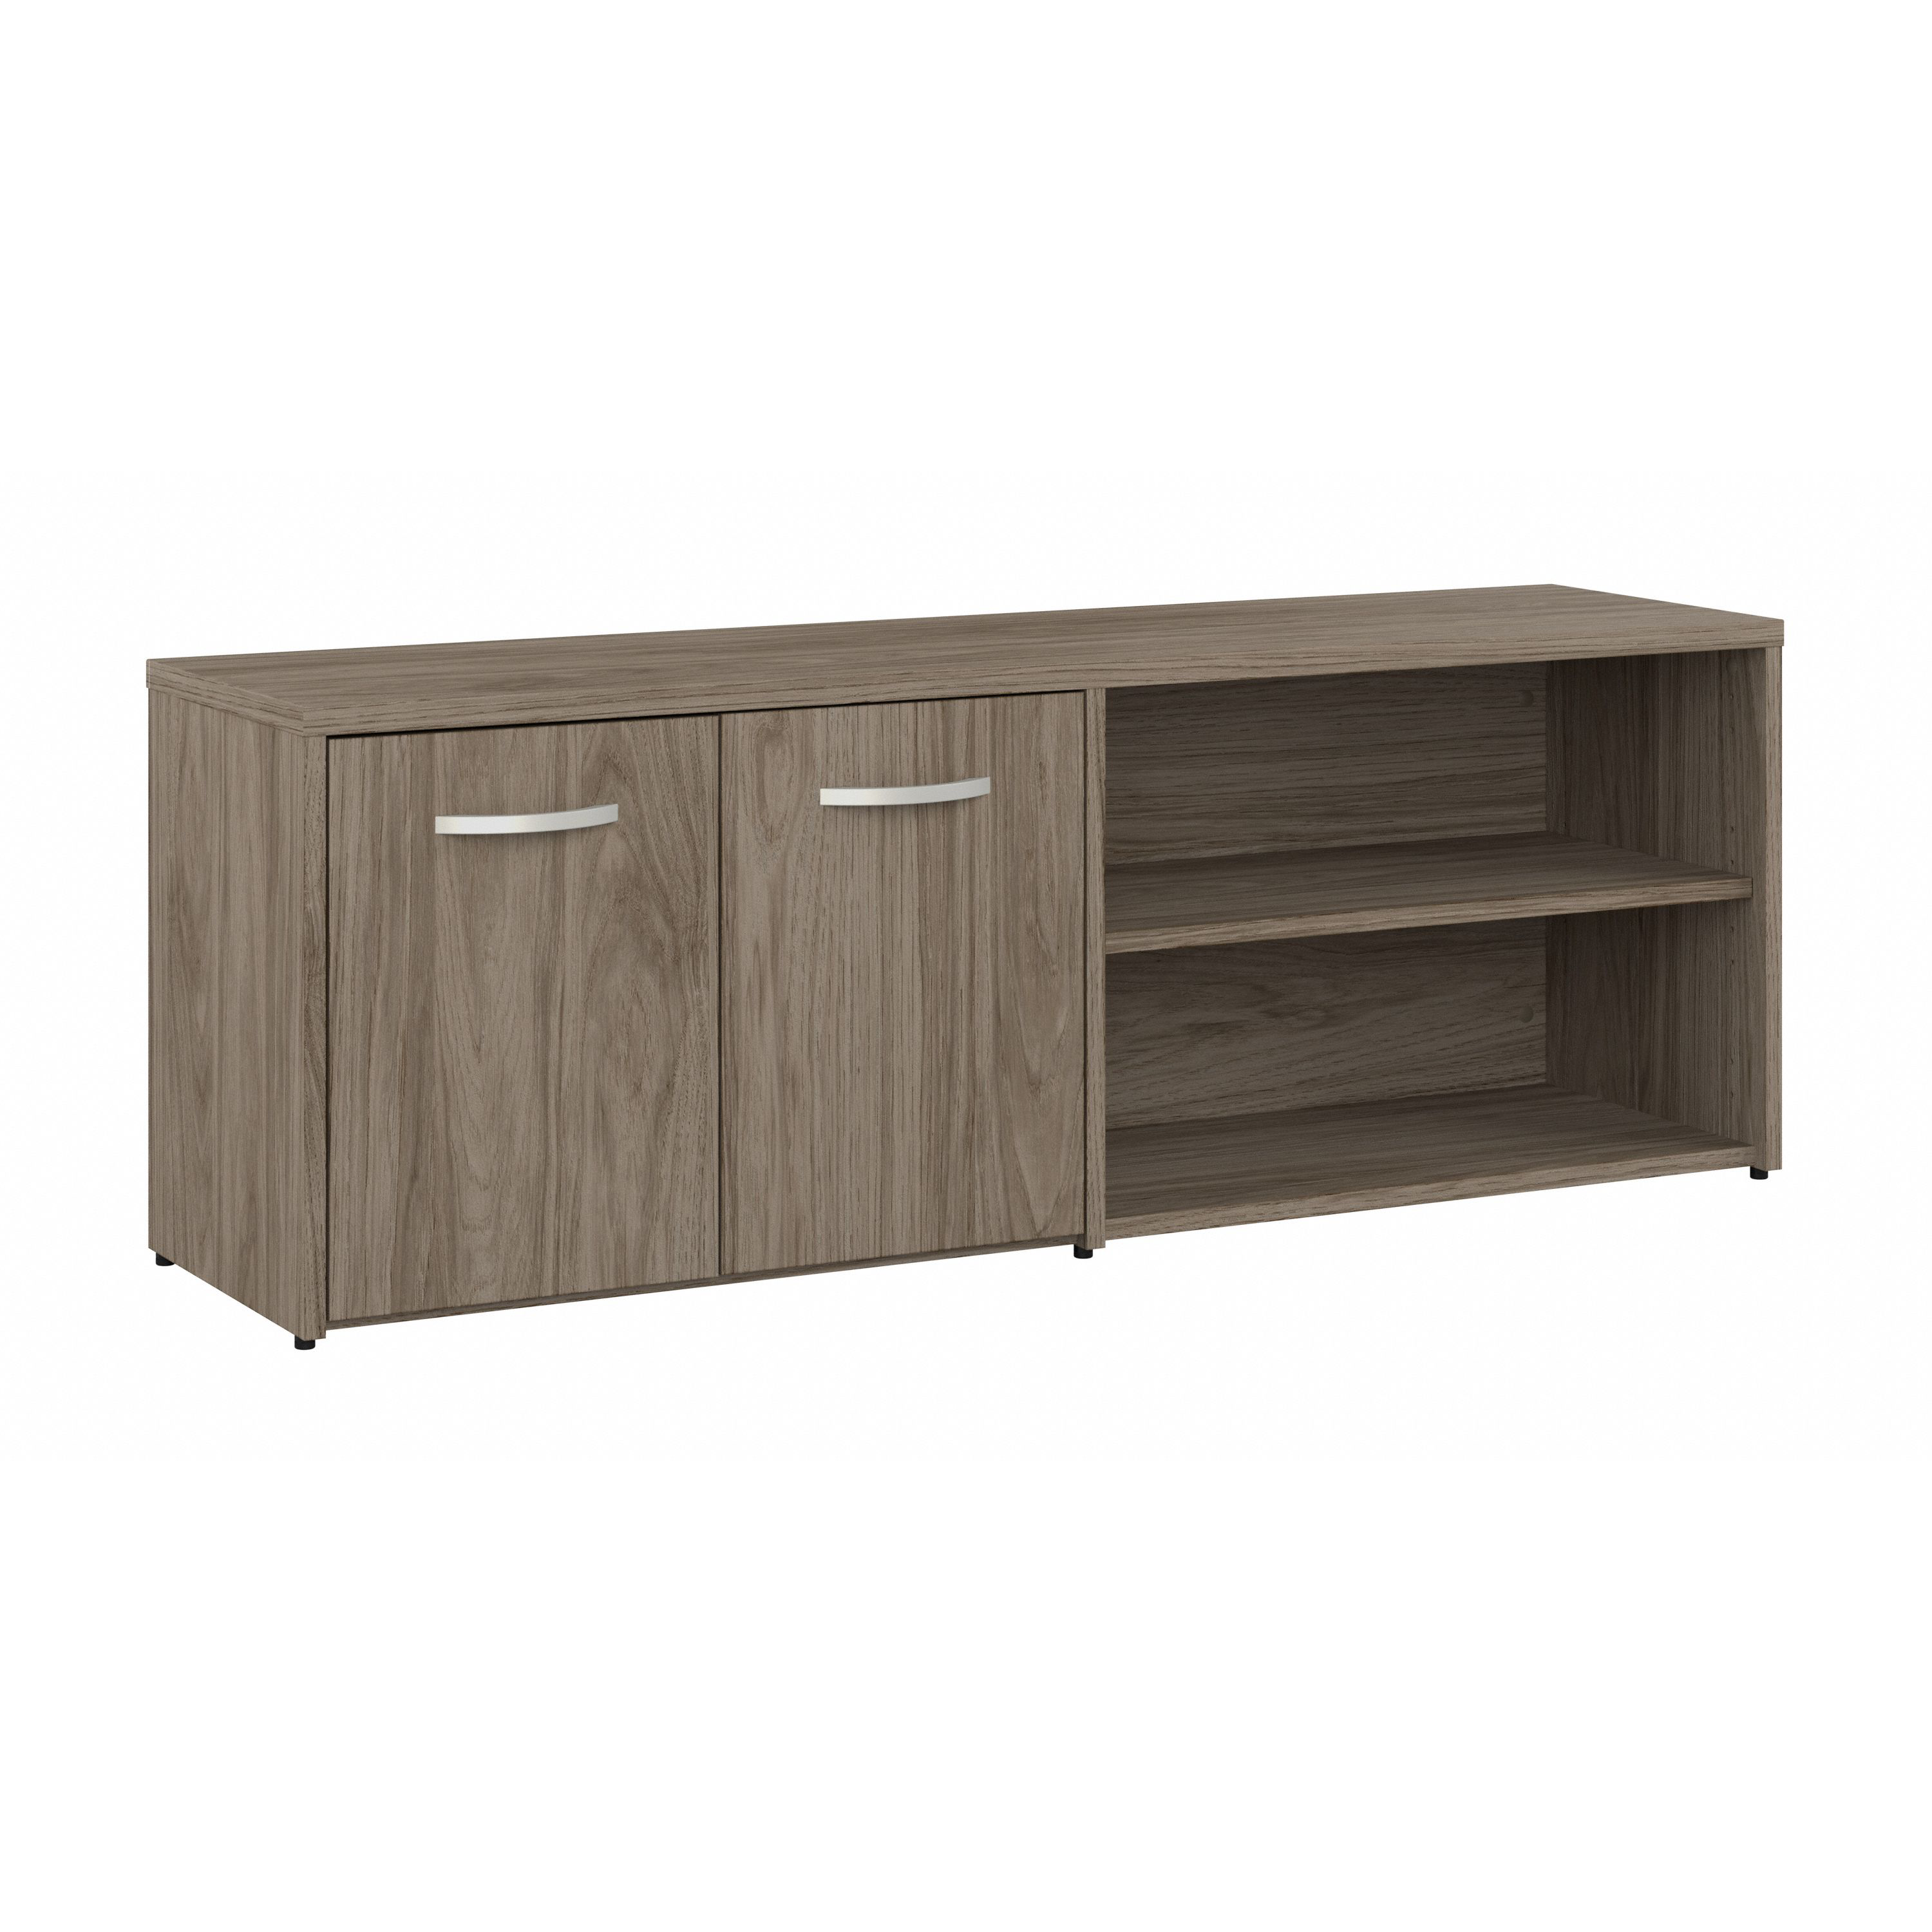 Shop Bush Business Furniture Studio C Low Storage Cabinet with Doors and Shelves 02 SCS160MH #color_modern hickory